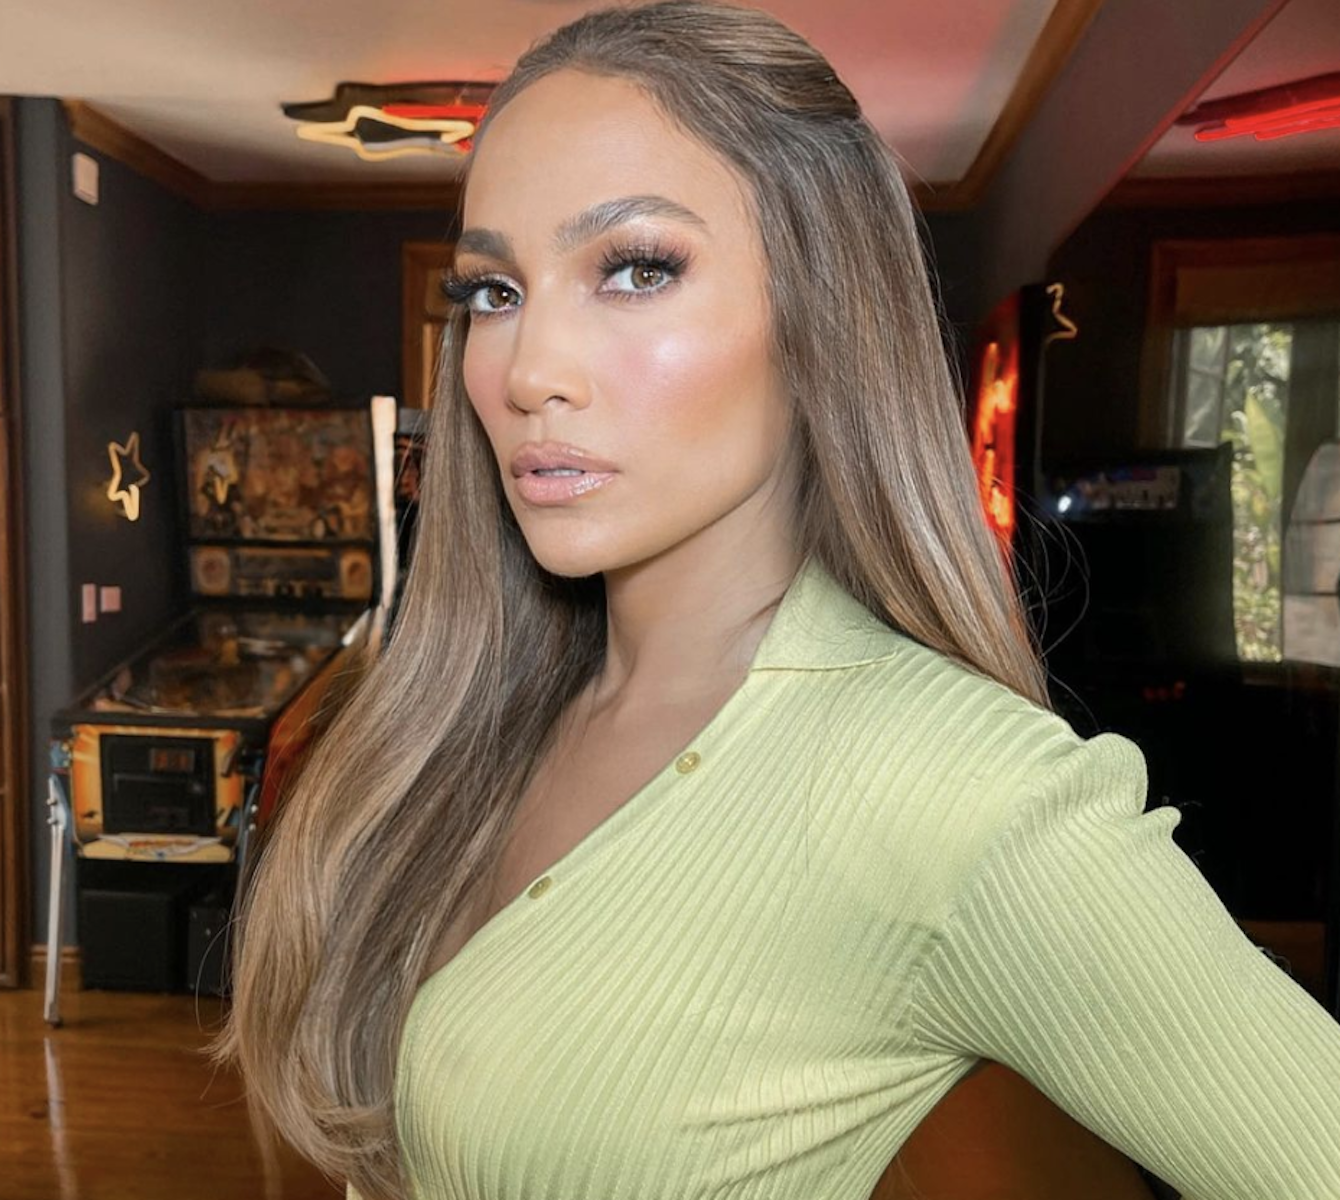 The JLo Inspired 'Touch Of Toffee' Hair Trend Perfect For Fall